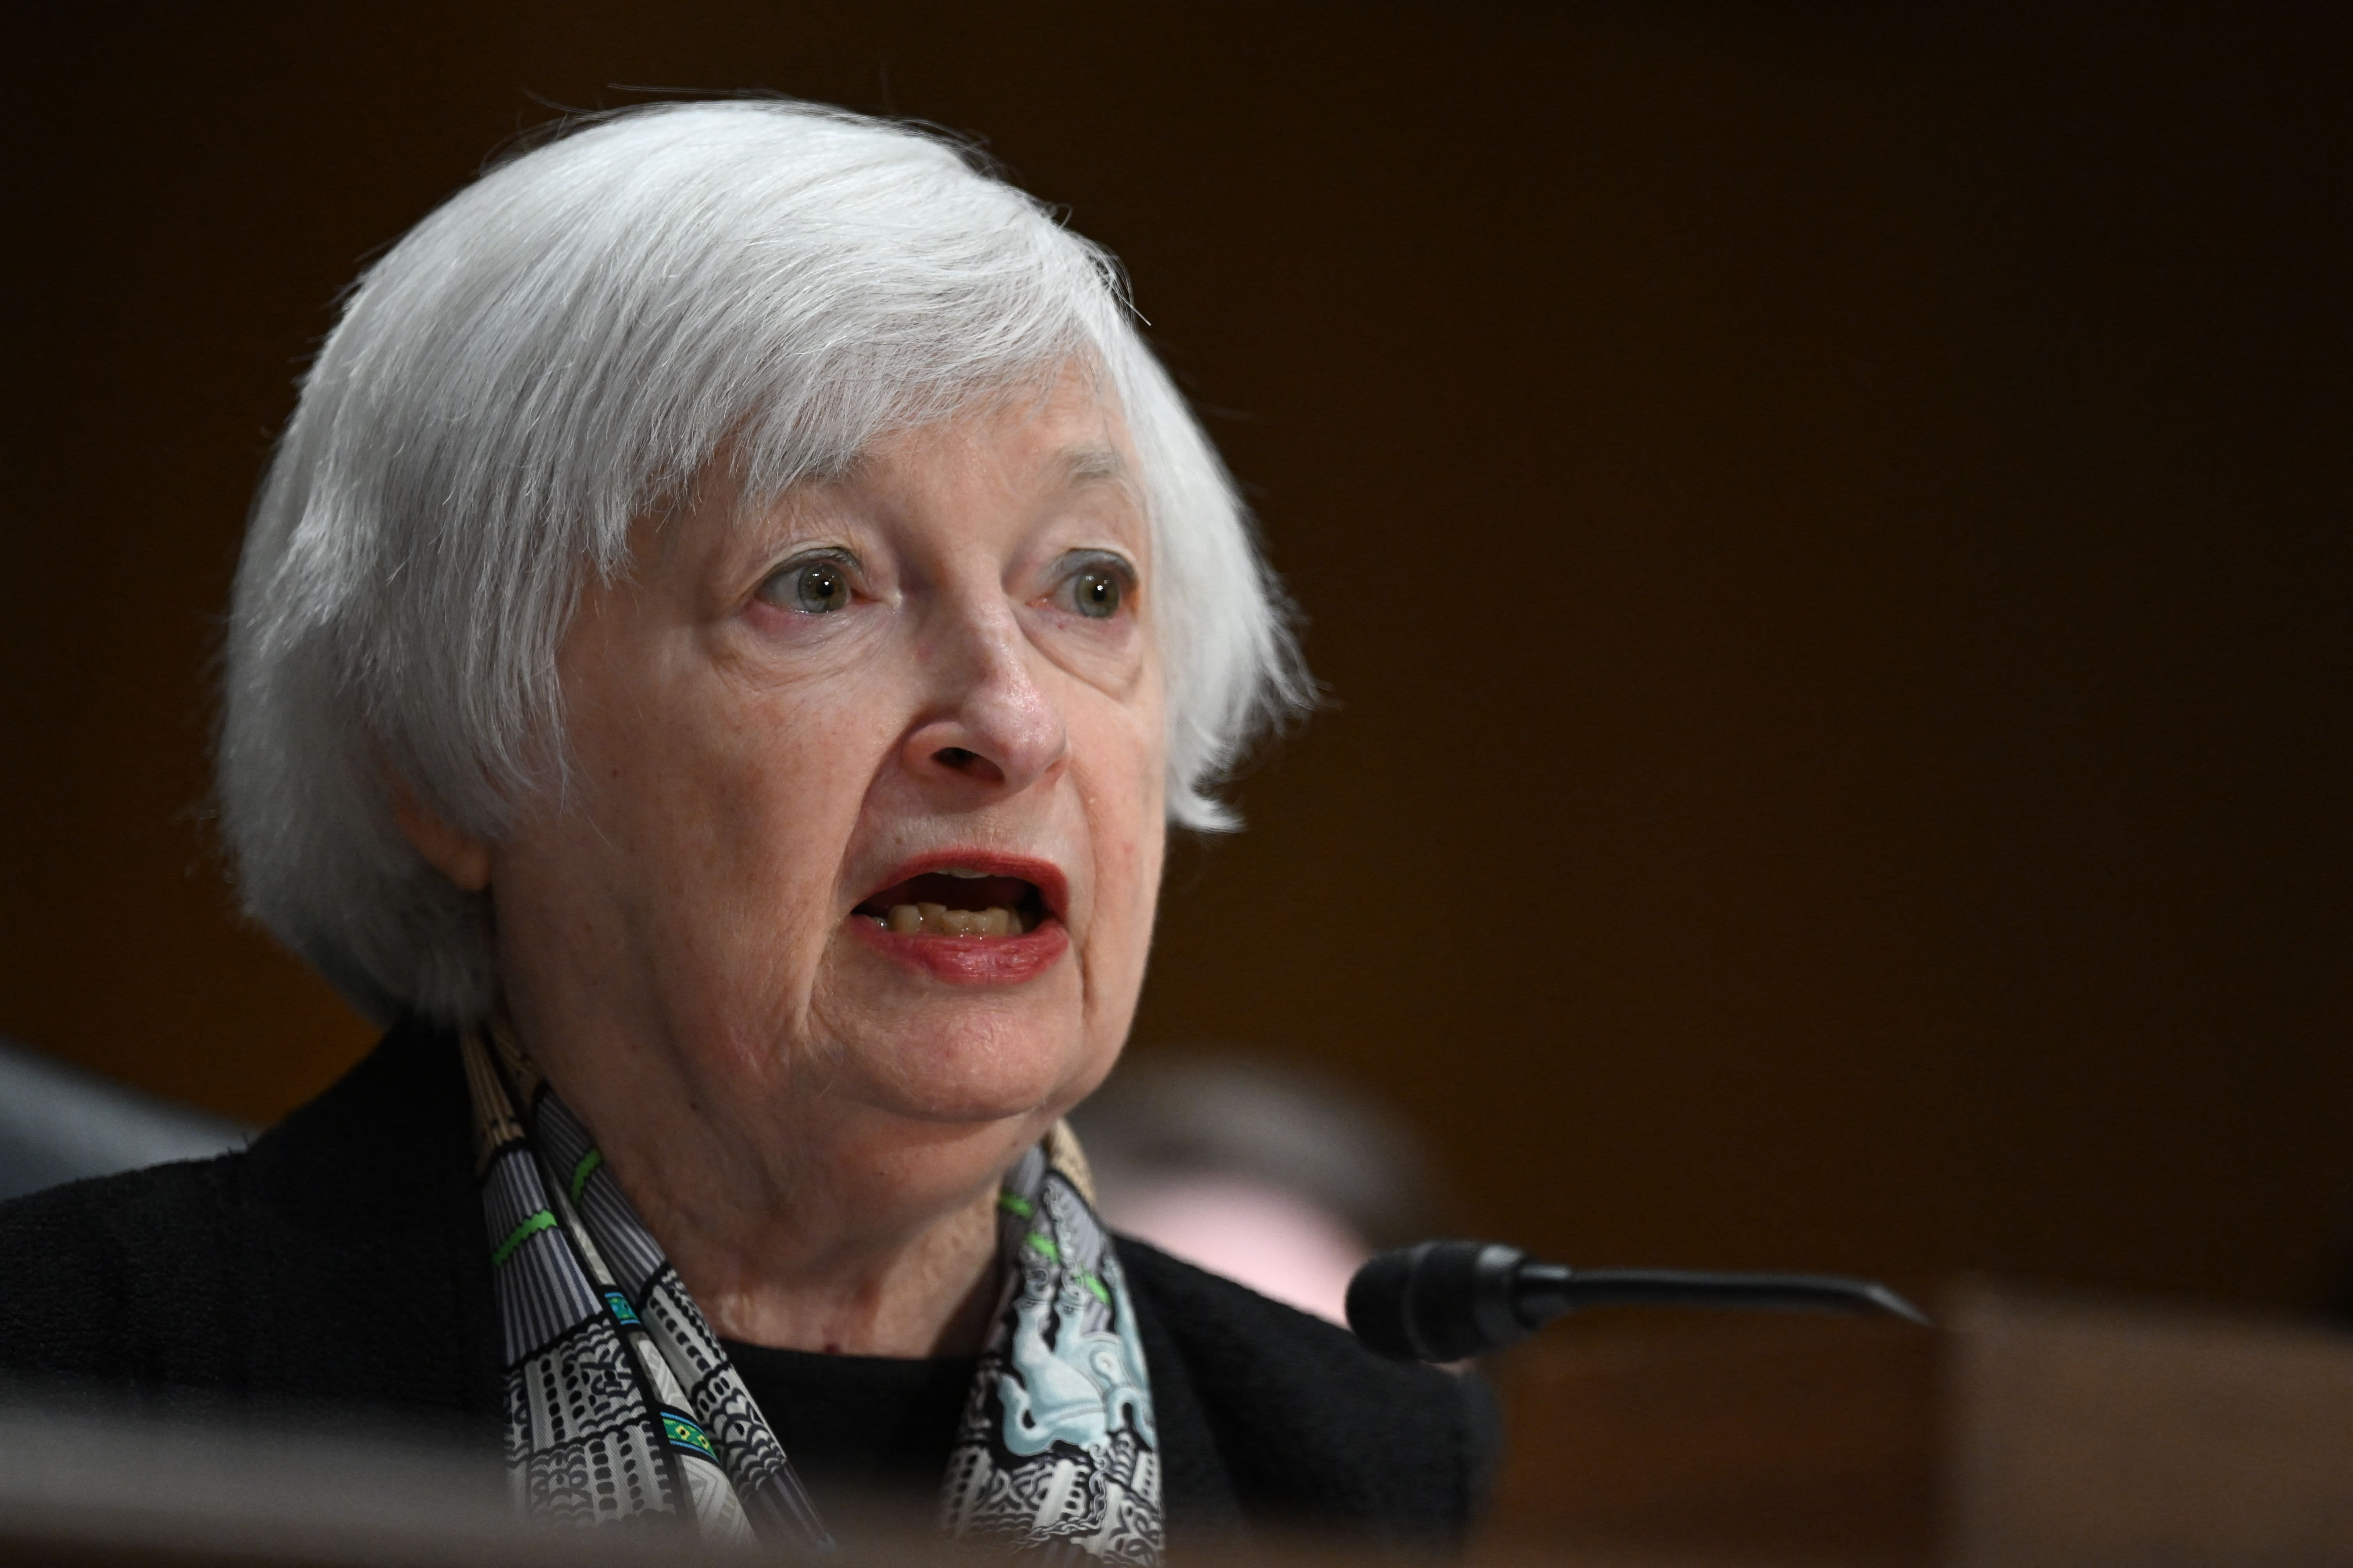 Treasury Secretary Yellen said the government could freeze more deposits if needed